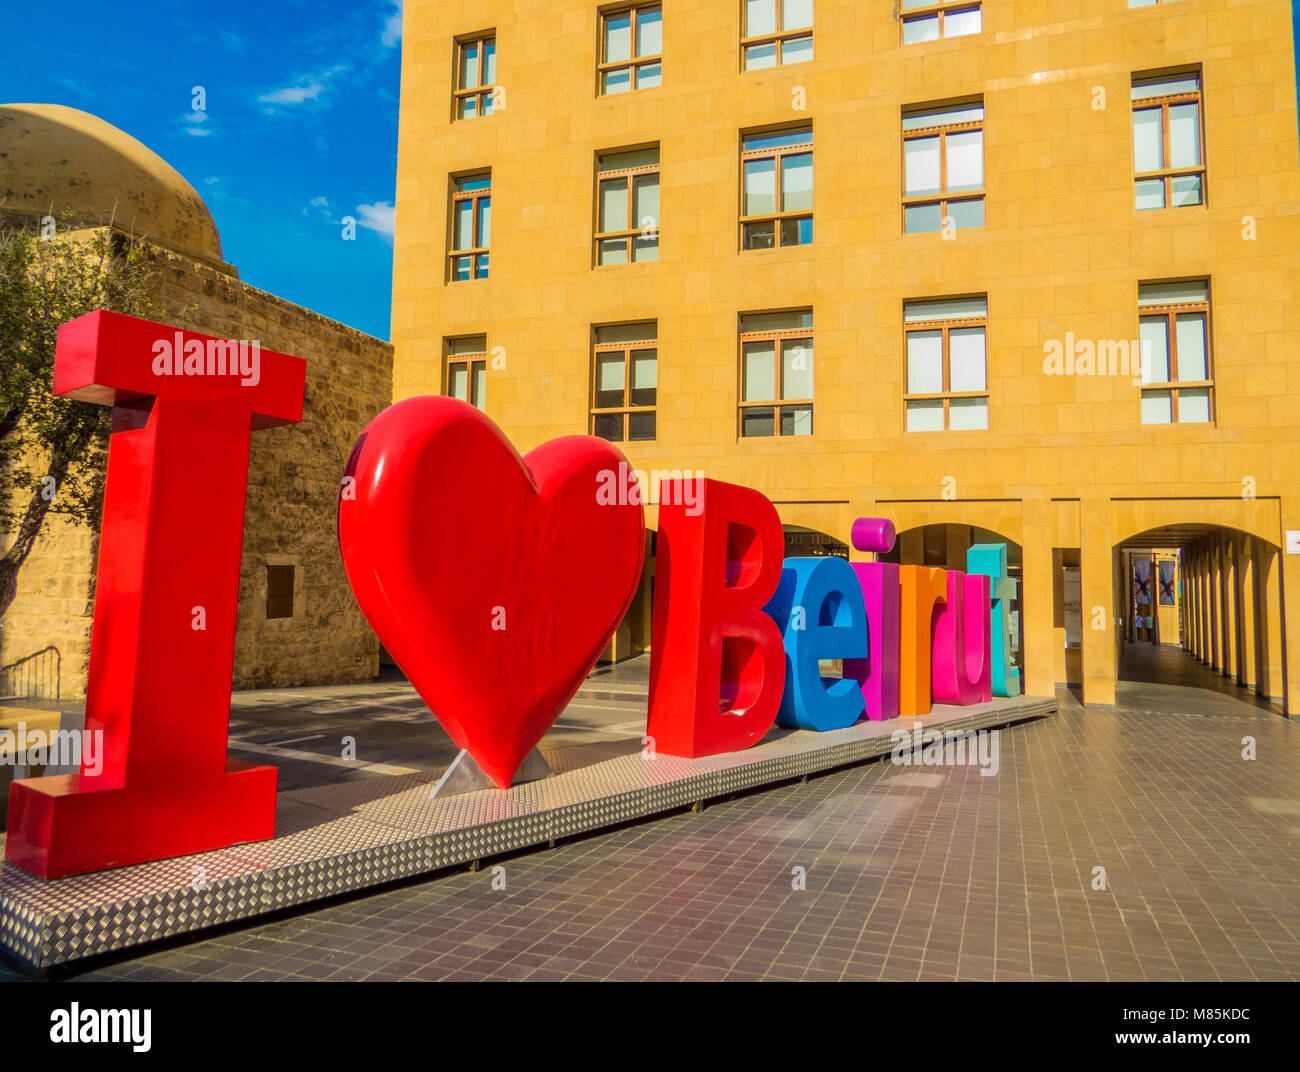 BEIRUT, LEBANON - MAY 22, 2017: Landmark colored letters sculpture 'I love Beirut' in the city downtown. Stock Photo